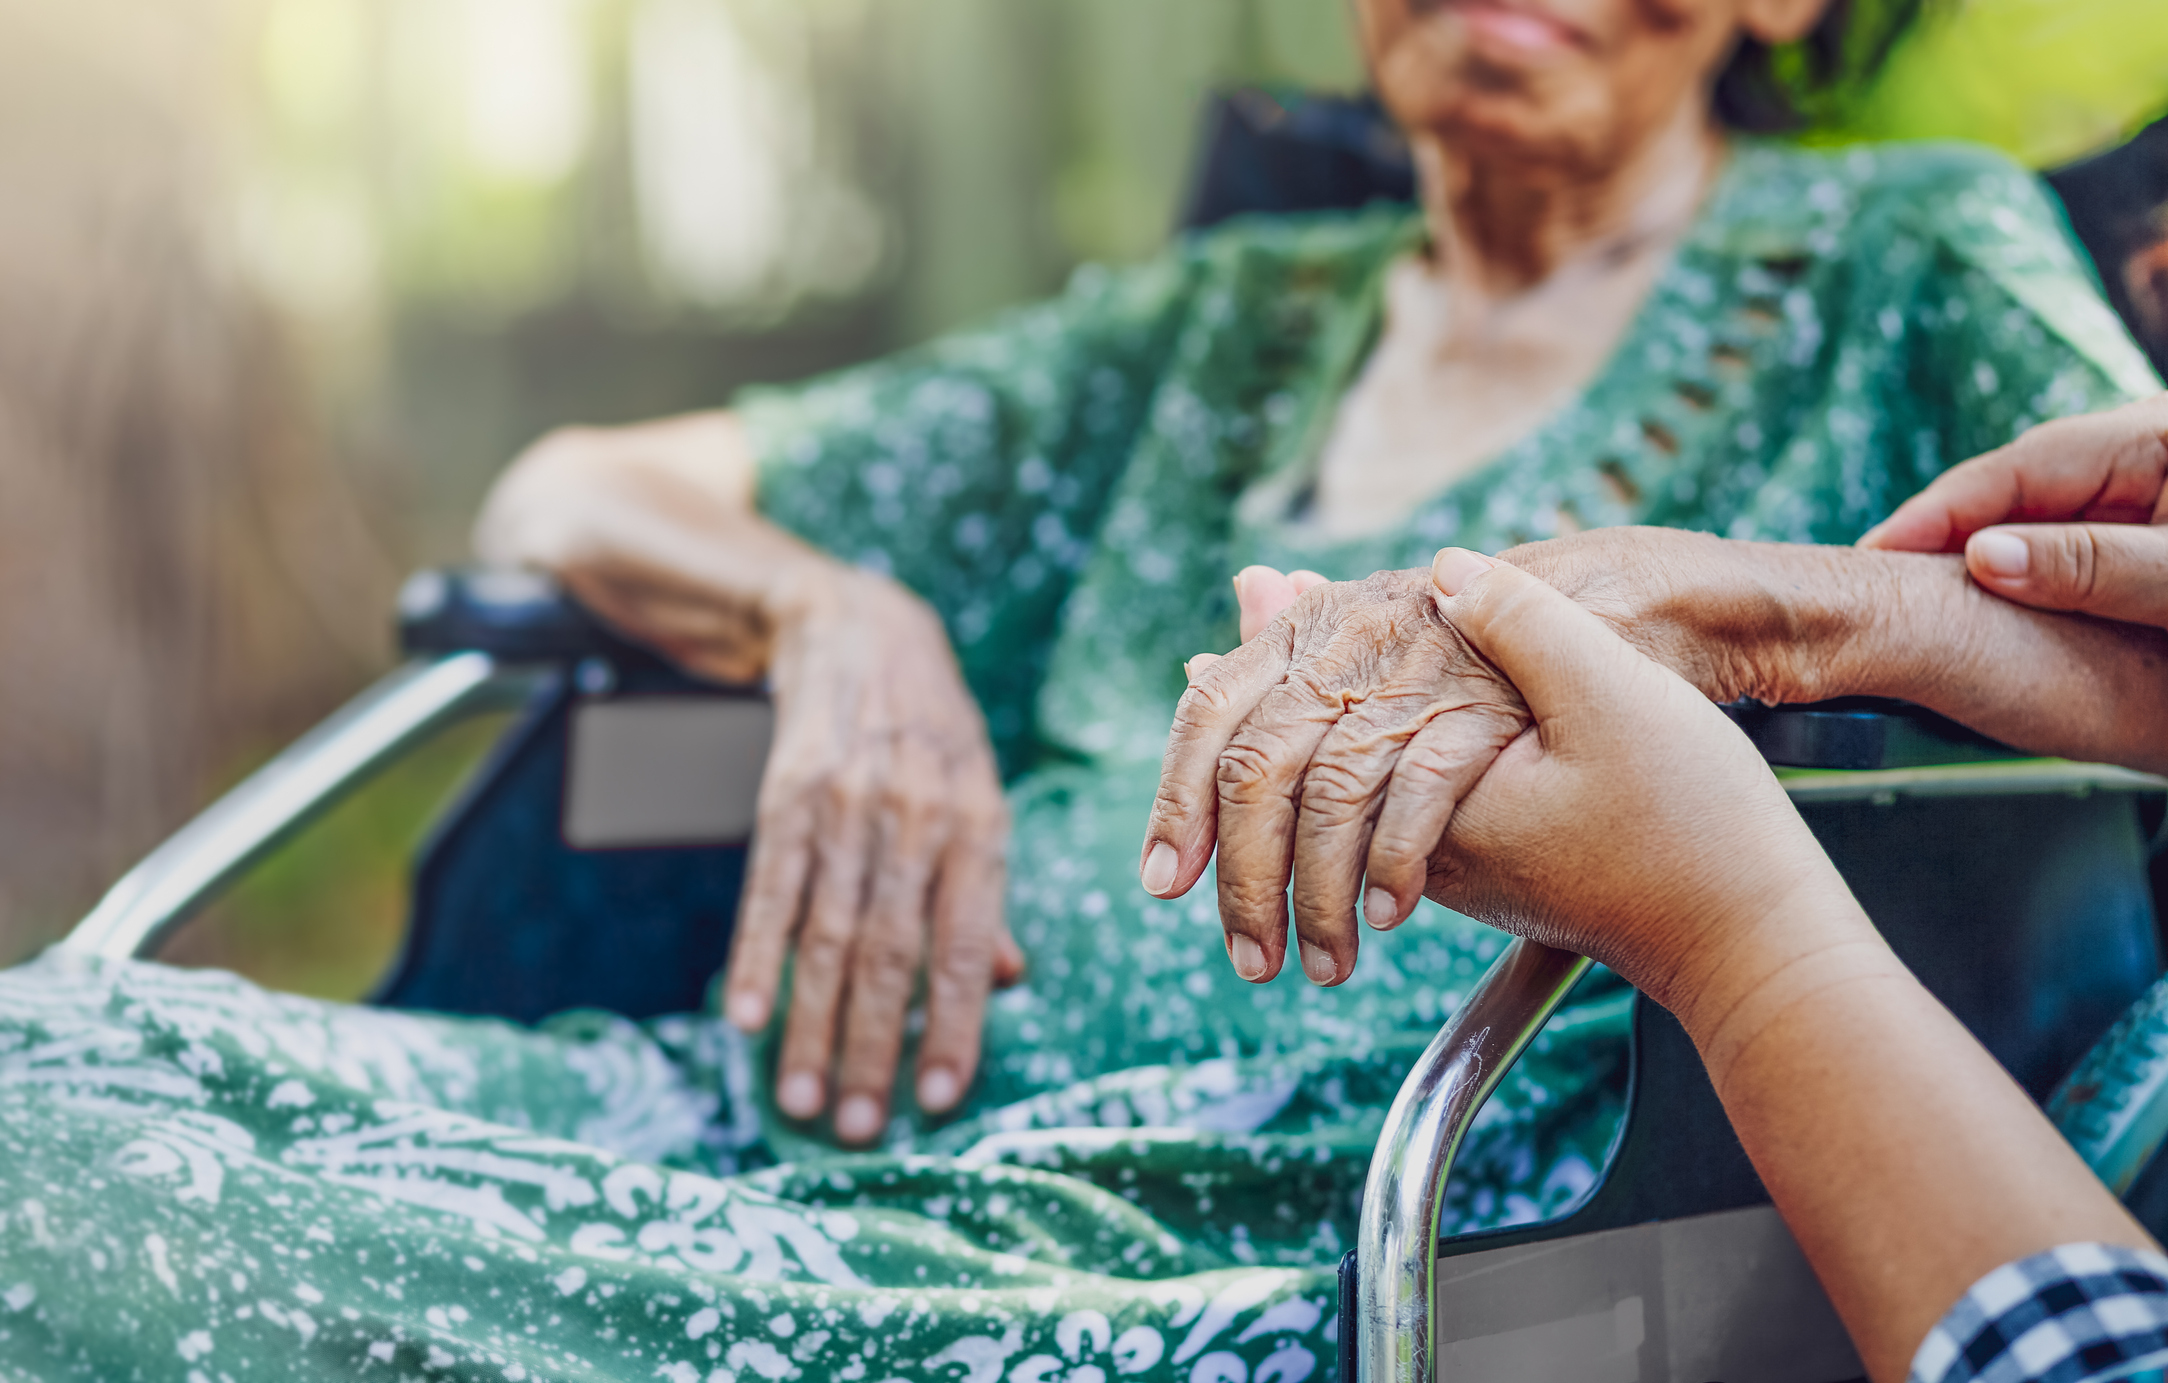 What makes the elderly more vulnerable to abuse?